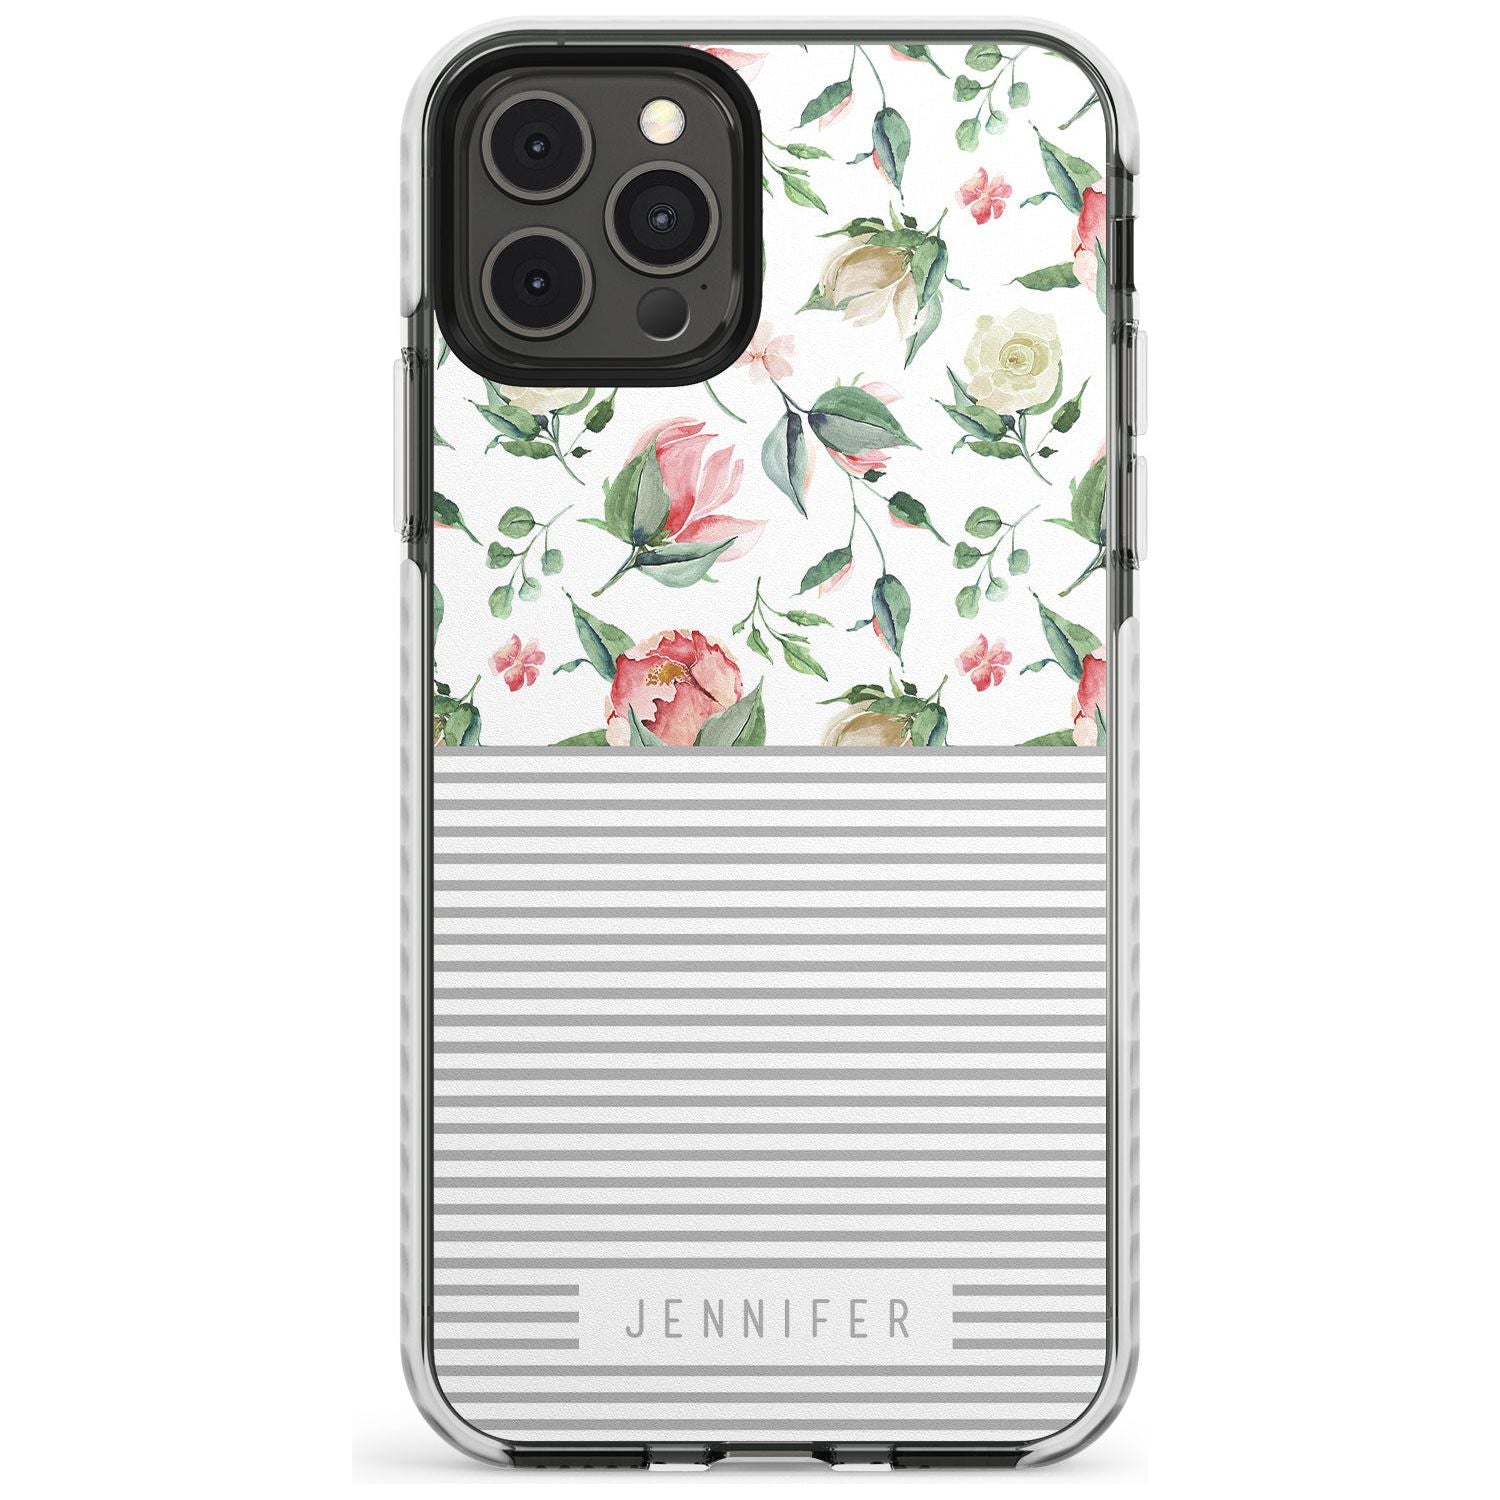 Light Floral Pattern & Stripes Slim TPU Phone Case for iPhone 11 Pro Max